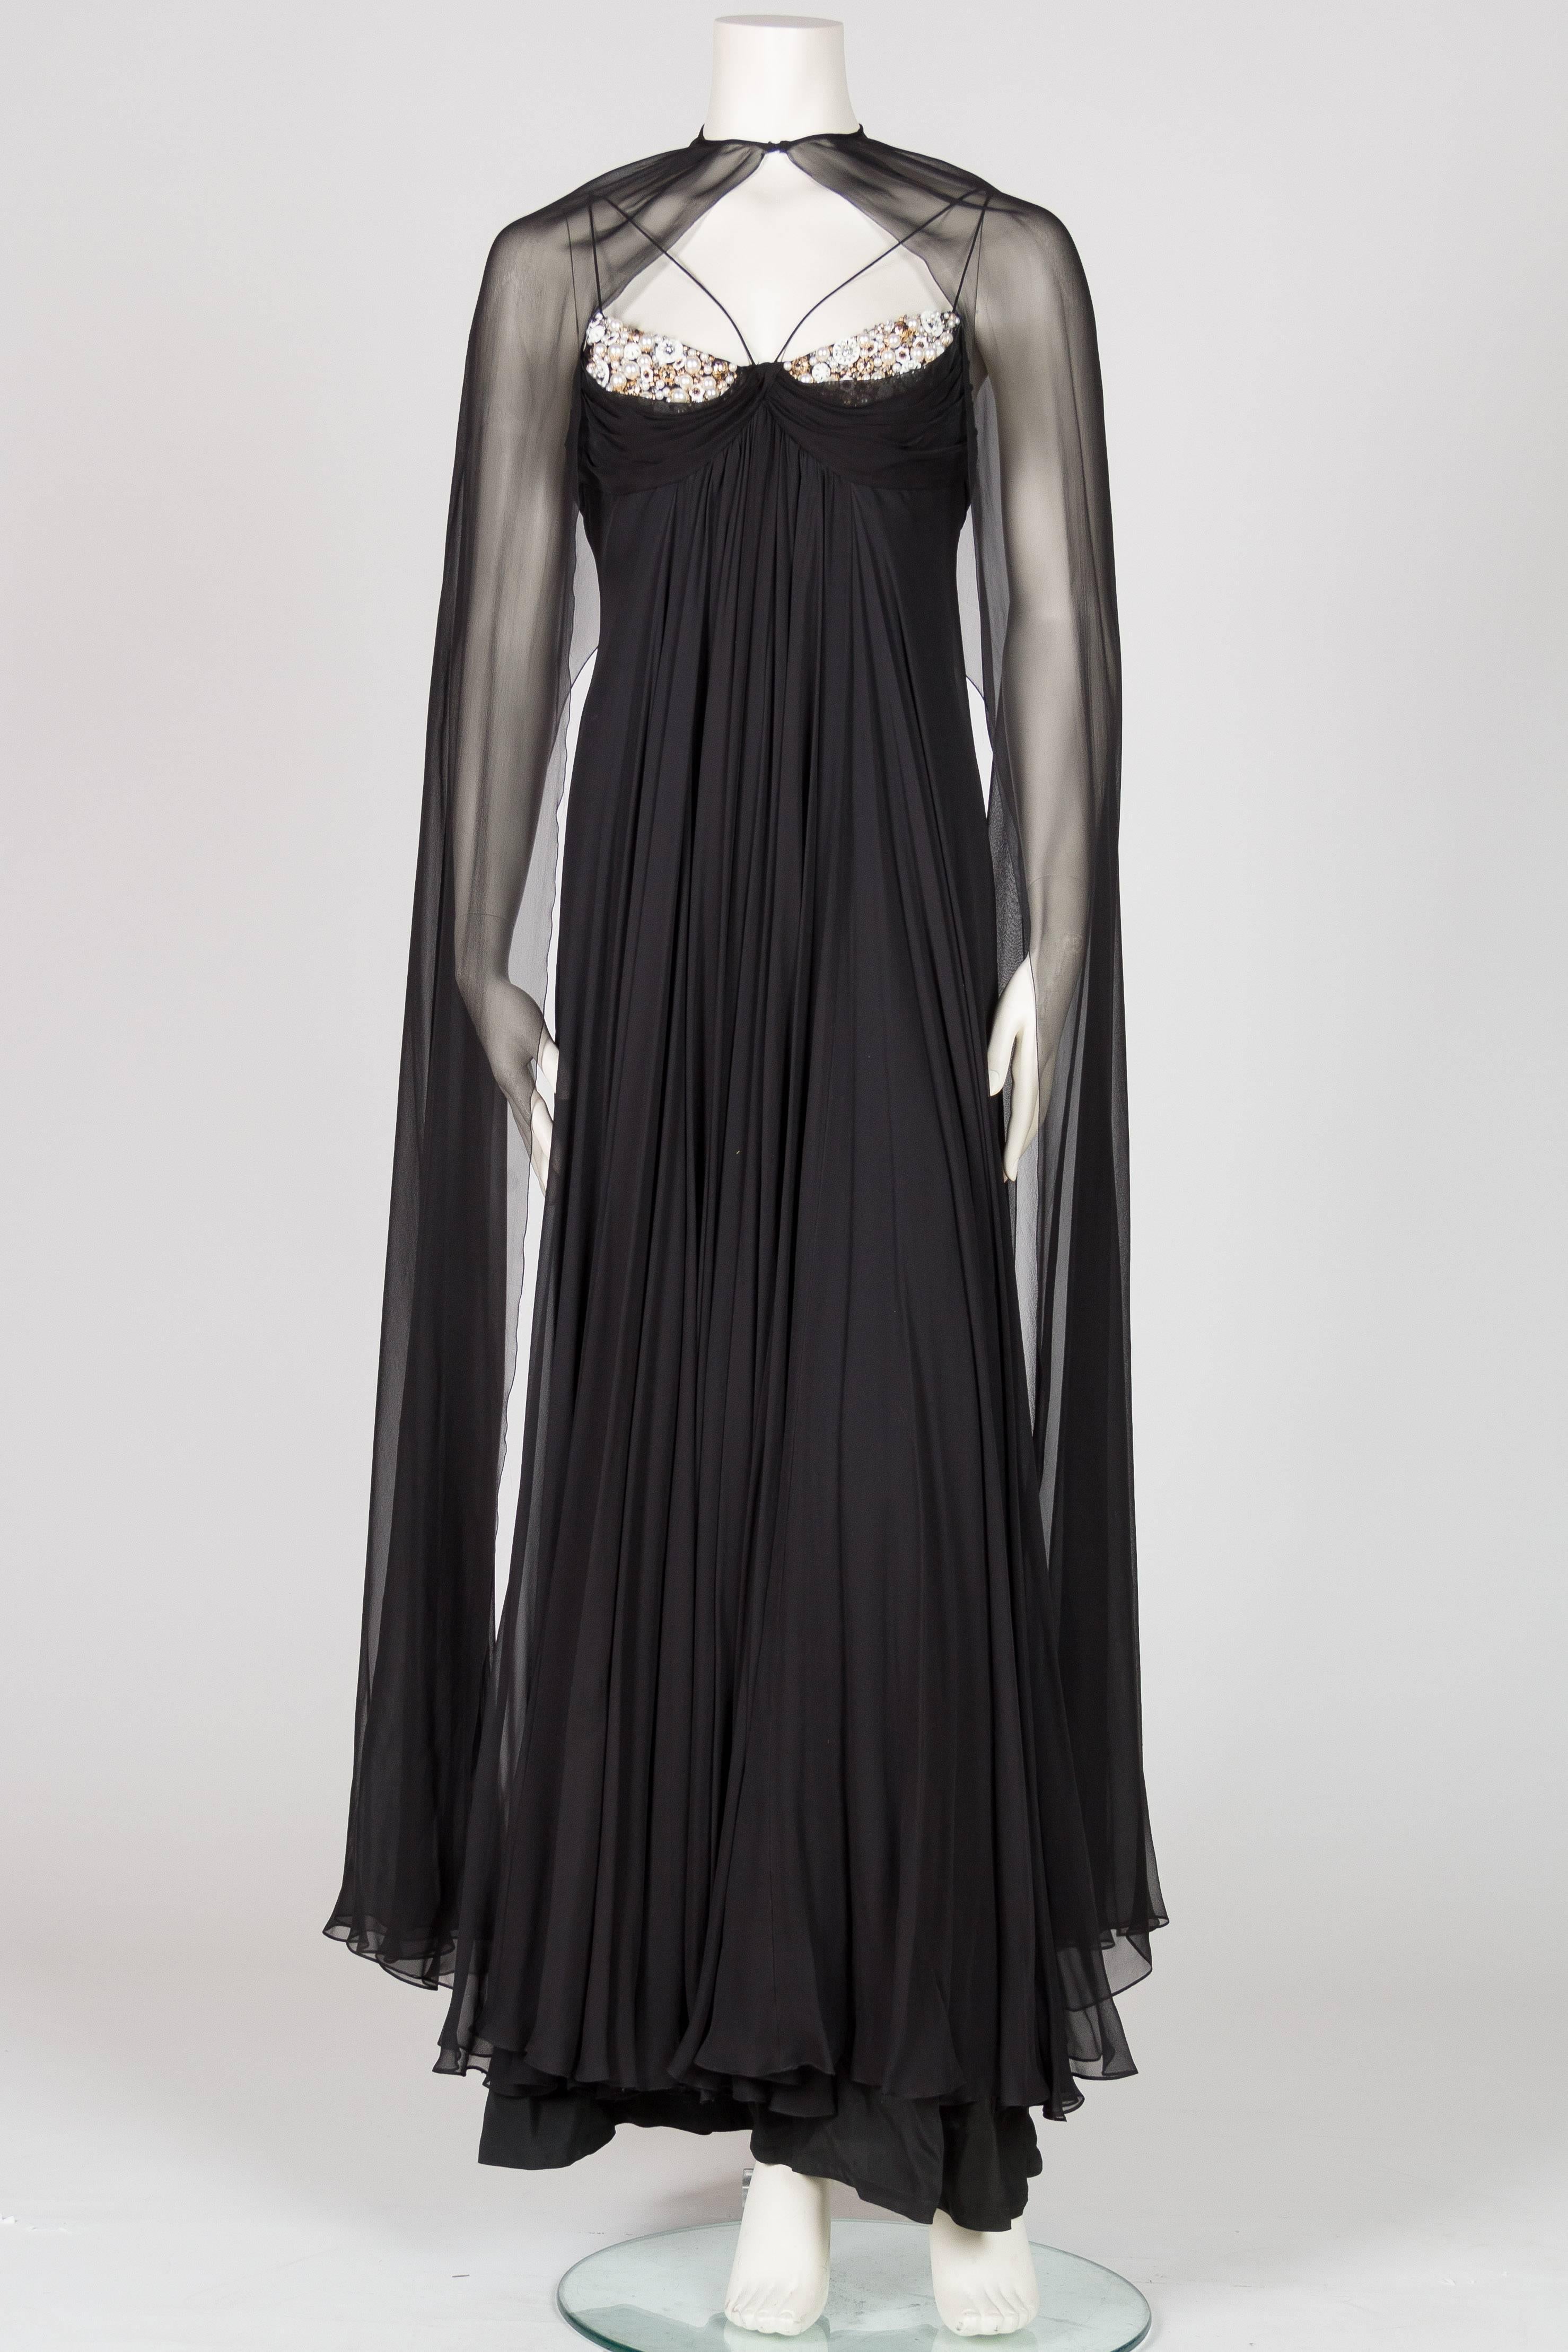 Empire waist with zipper up back, fits small to medium bust. Accented with pearls, beads and crystals. Lined in silk. Listing as 1970s however this gown could be from the late 1960s. Valentino introduced this cut in 1966 and these style gowns are